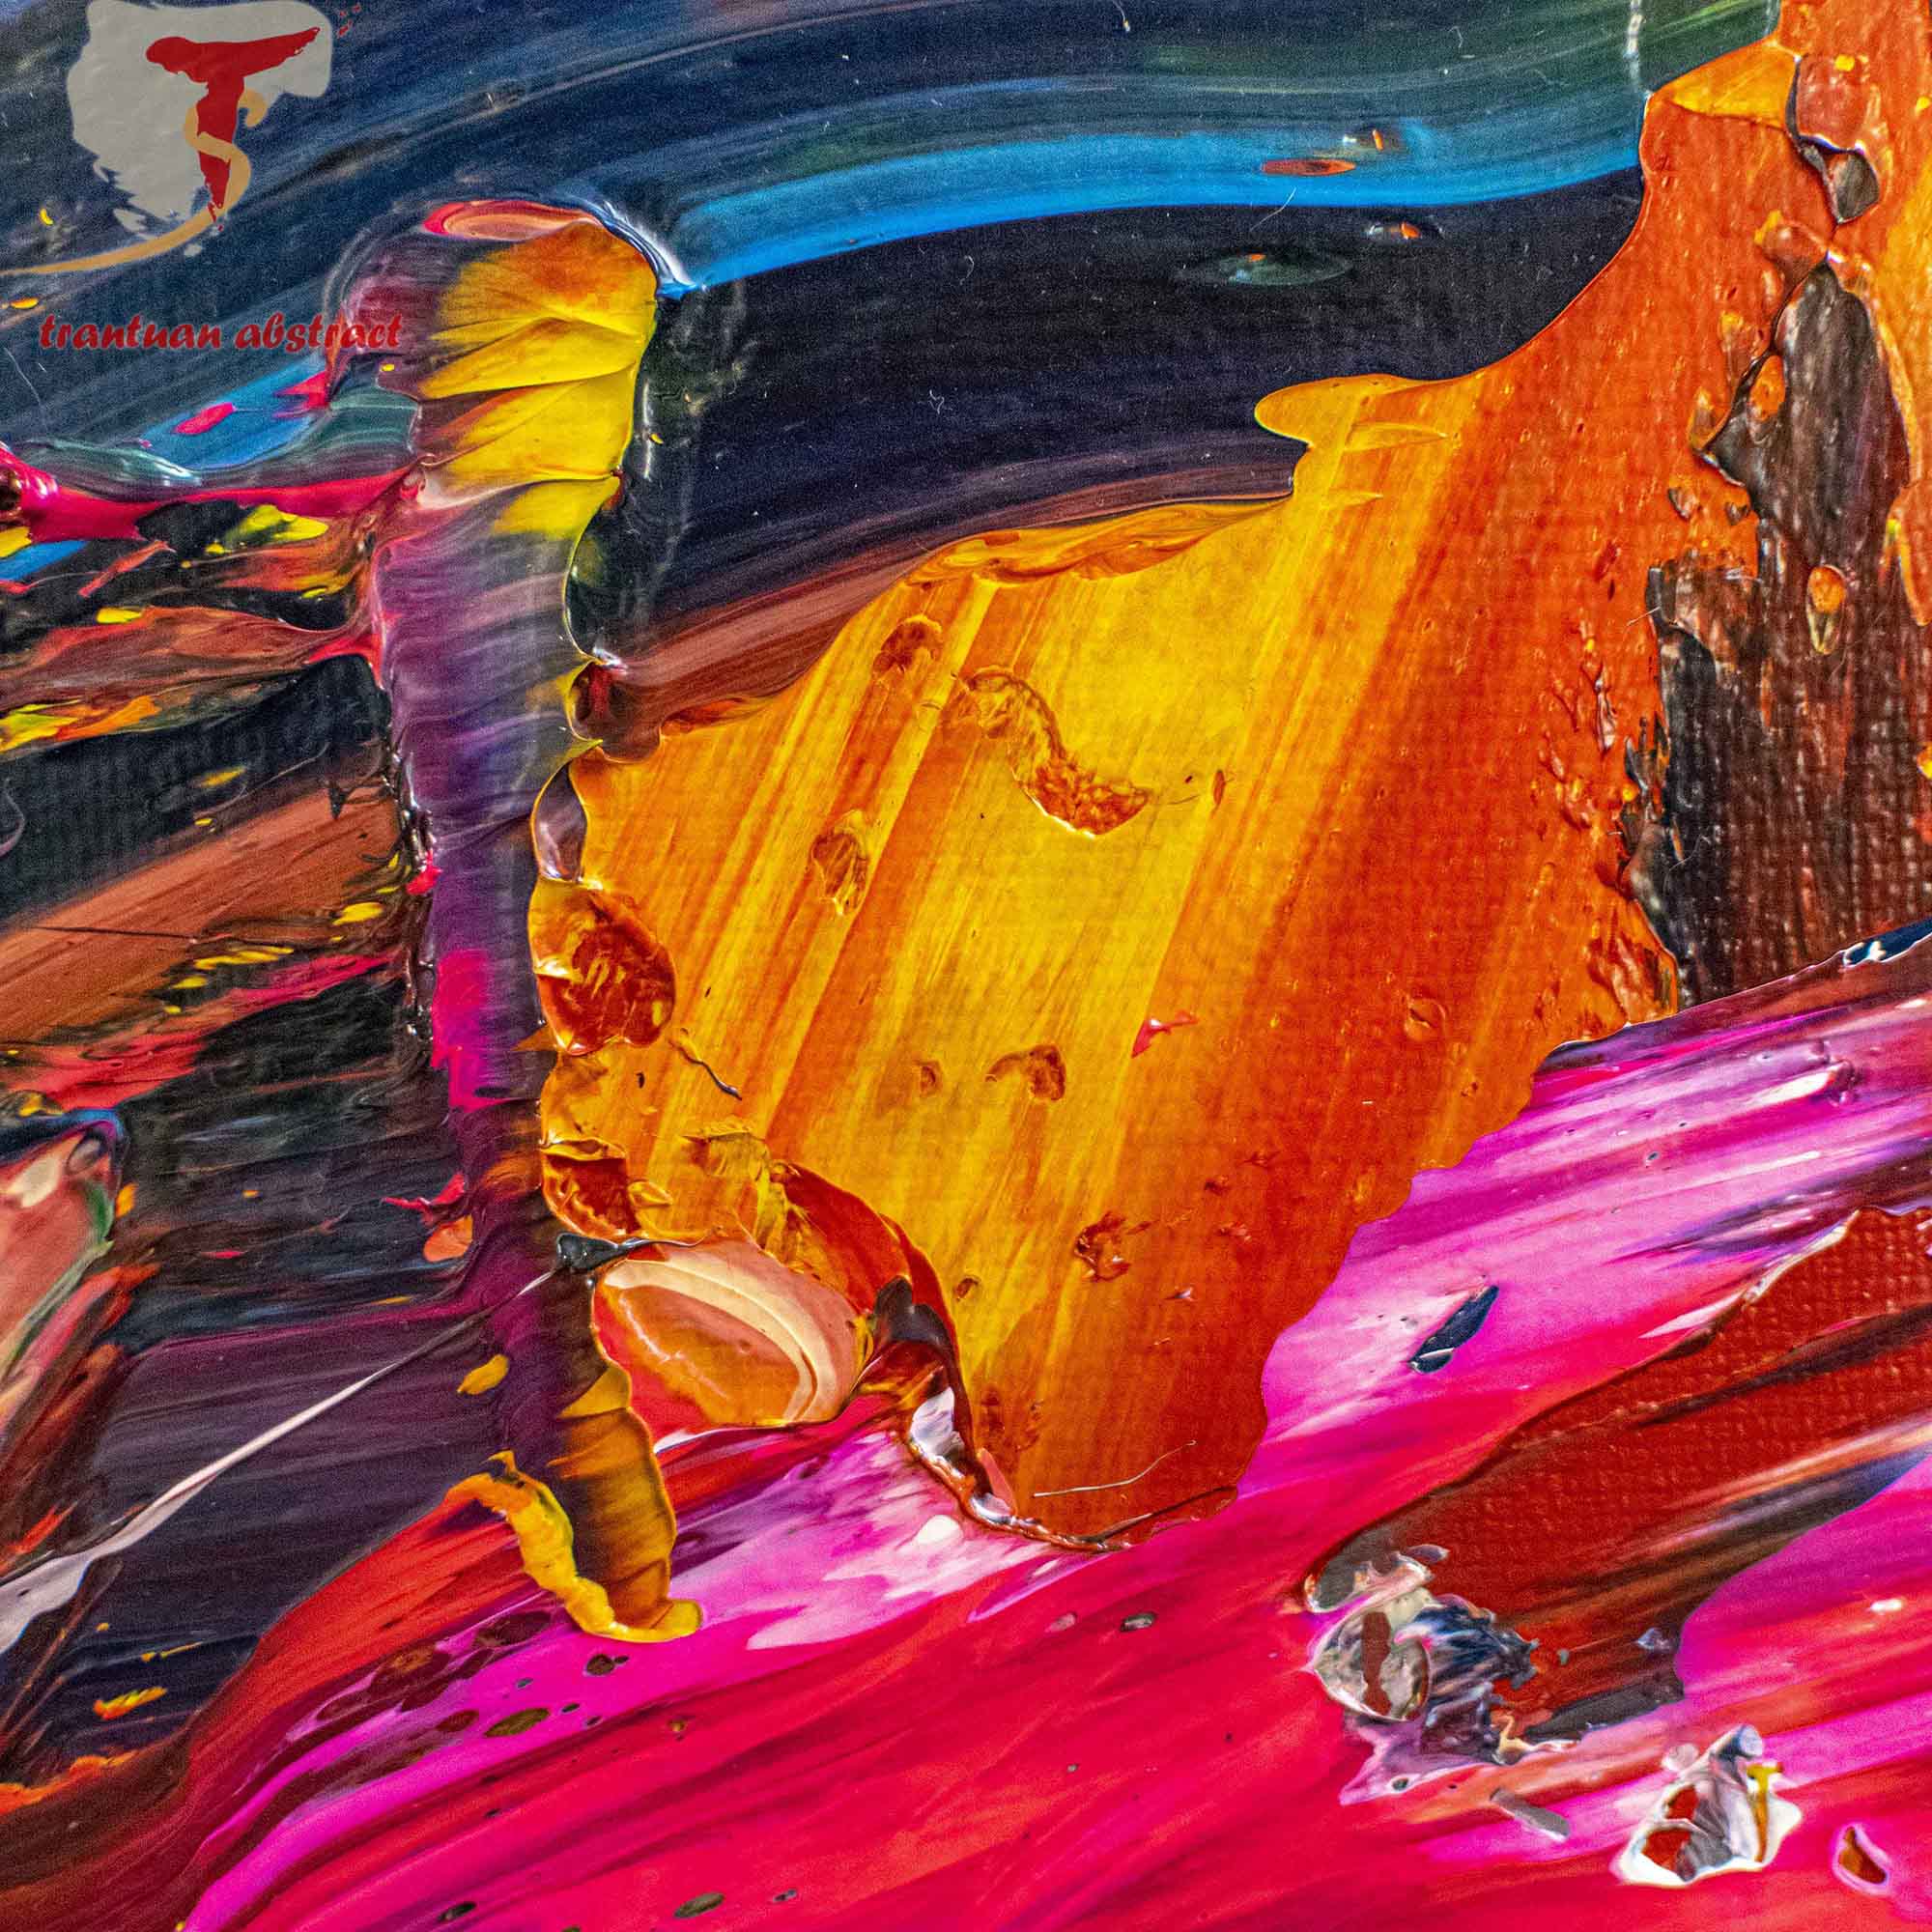 Tran Tuan Abstract Vibrant Warmth 2021 120 x 100 x 5 cm Acrylic on Canvas Painting Detail s (25)